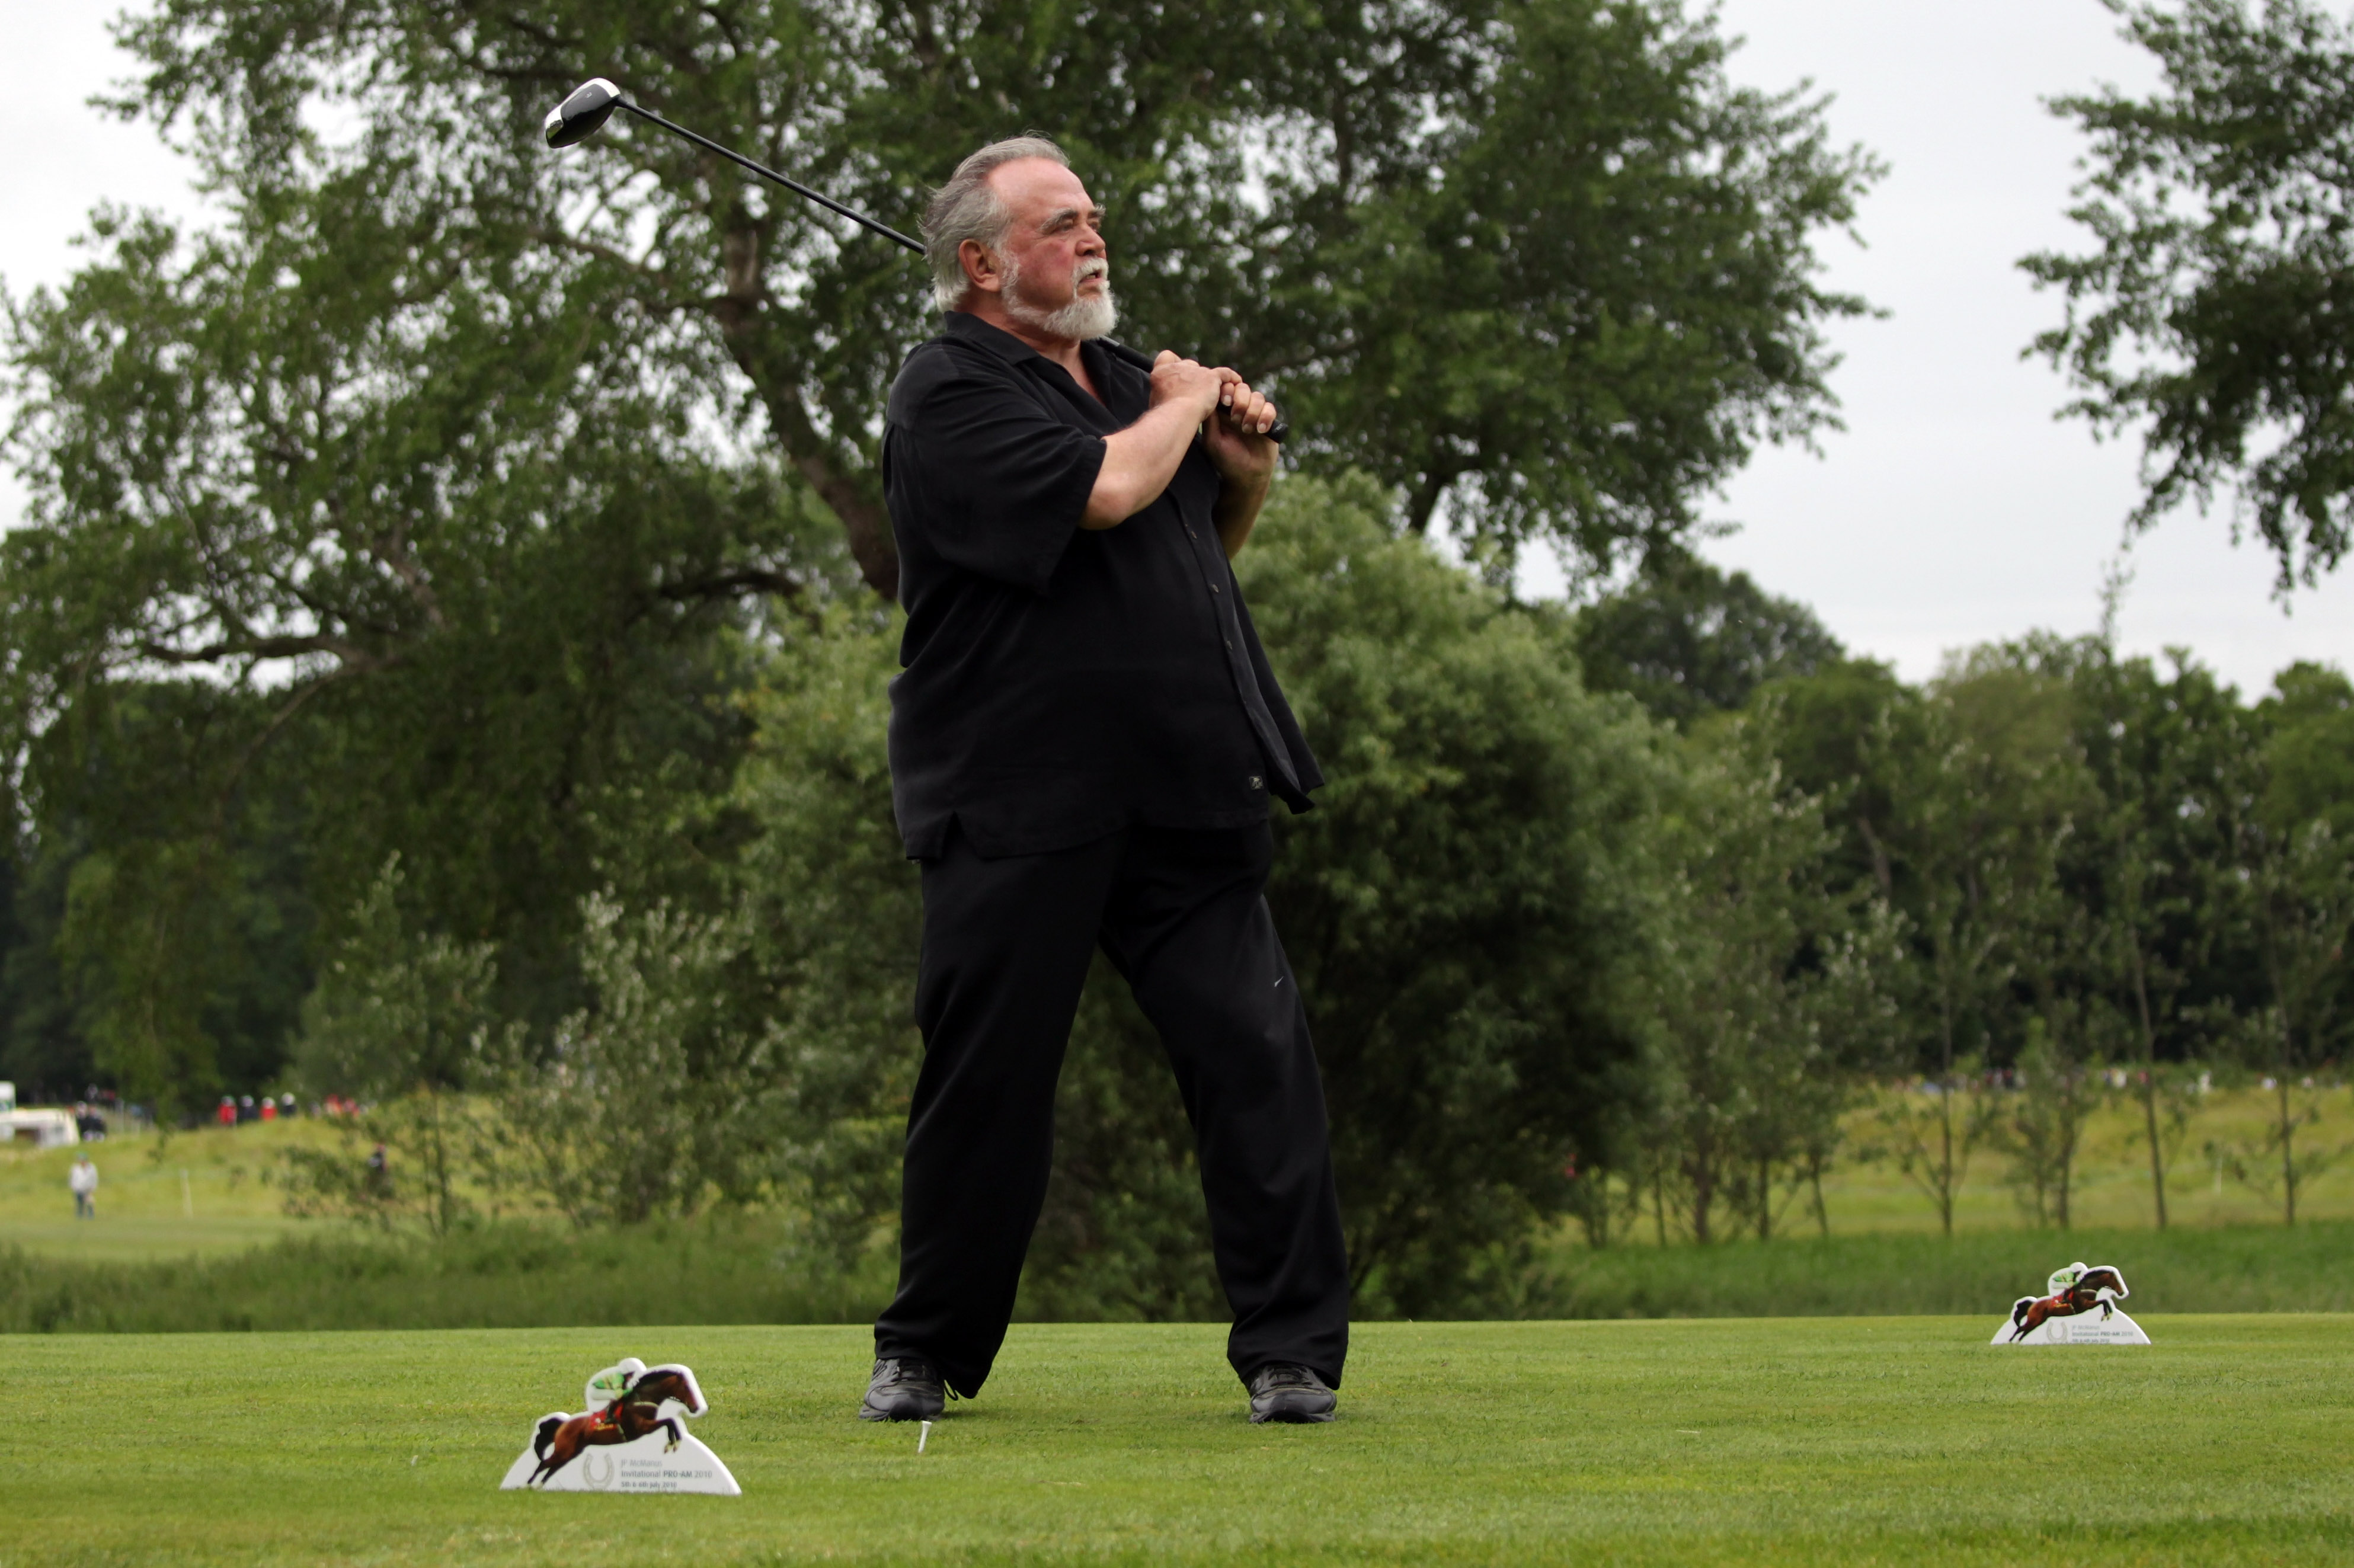 LIMERICK, IRELAND - JULY 06:  Herb Kohler, American businessman, in action during the second round of The JP McManus Invitational Pro-Am event at the Adare Manor Hotel and Golf Resort on July 6, 2010 in Limerick, Ireland.  (Photo by Andrew Redington/Getty